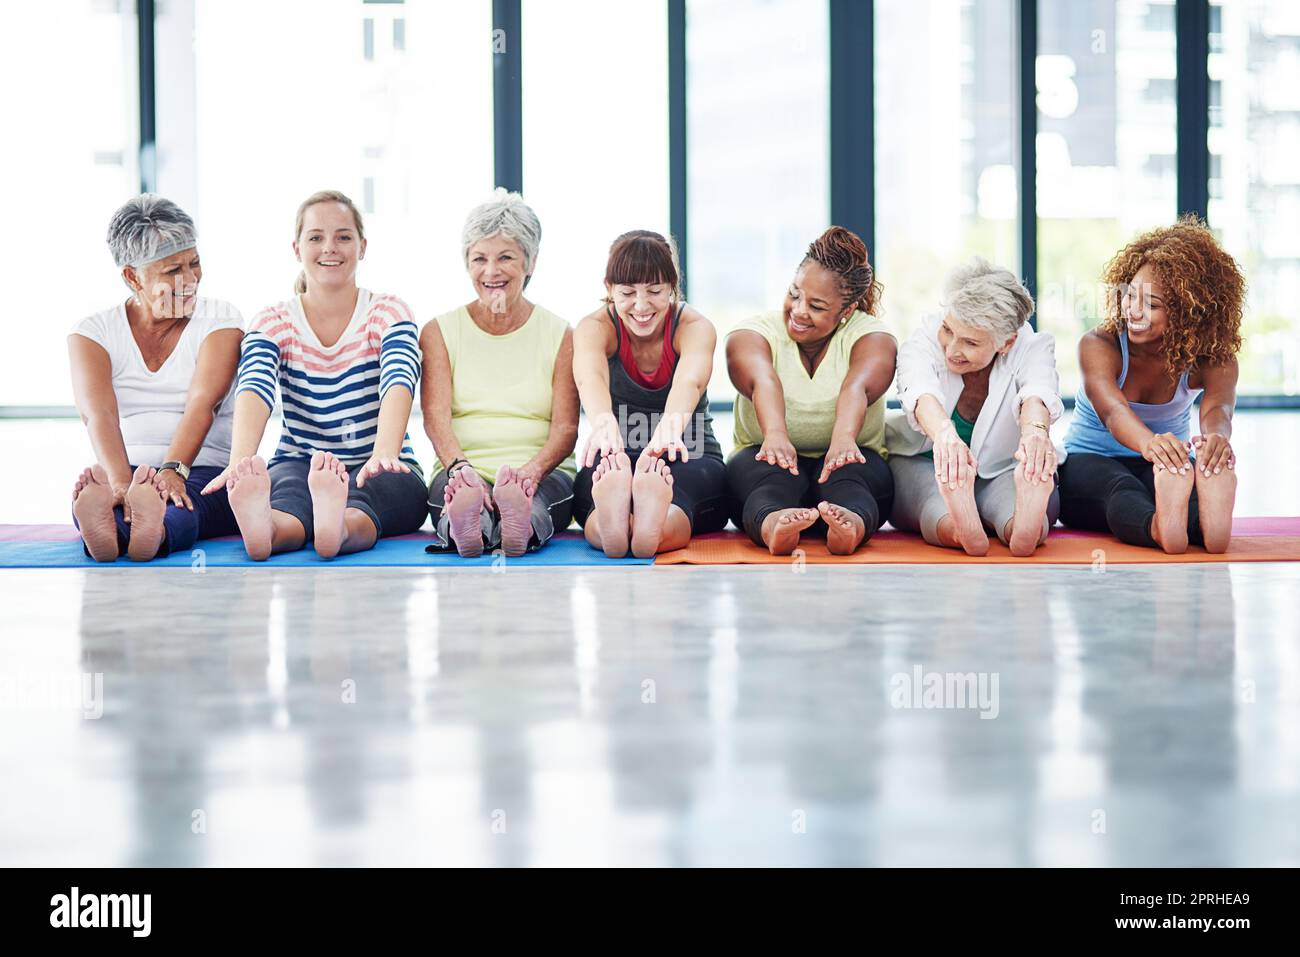 Its important to warmup. a group of women warming up indoors. Stock Photo